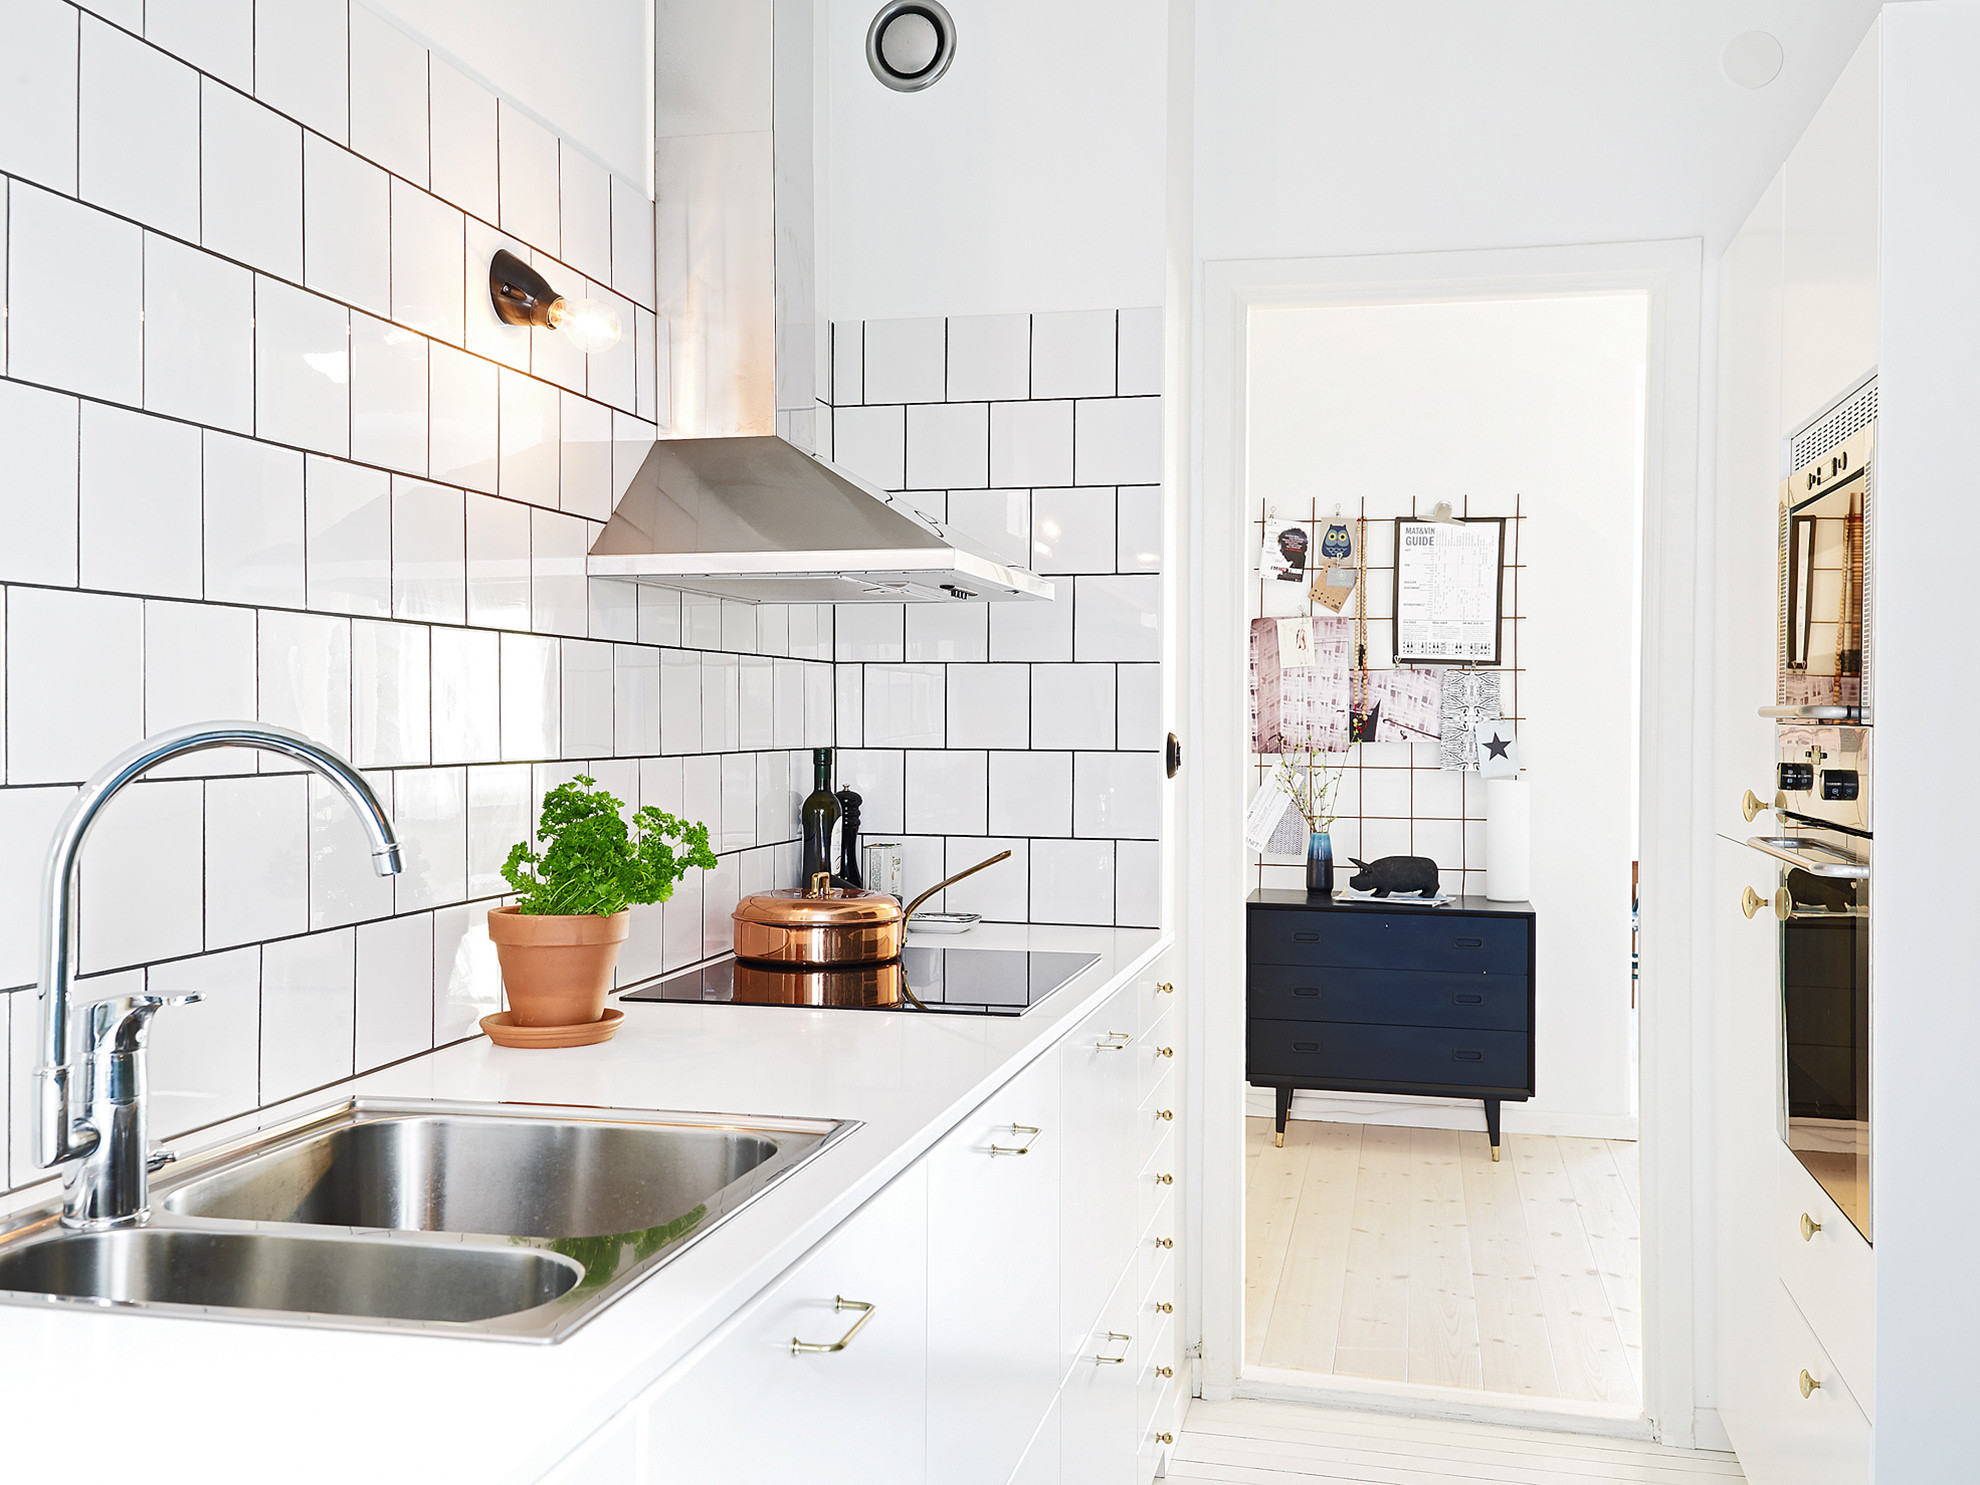 White Kitchen Subway Tiles
 Kitchen Subway Tiles Are Back In Style – 50 Inspiring Designs